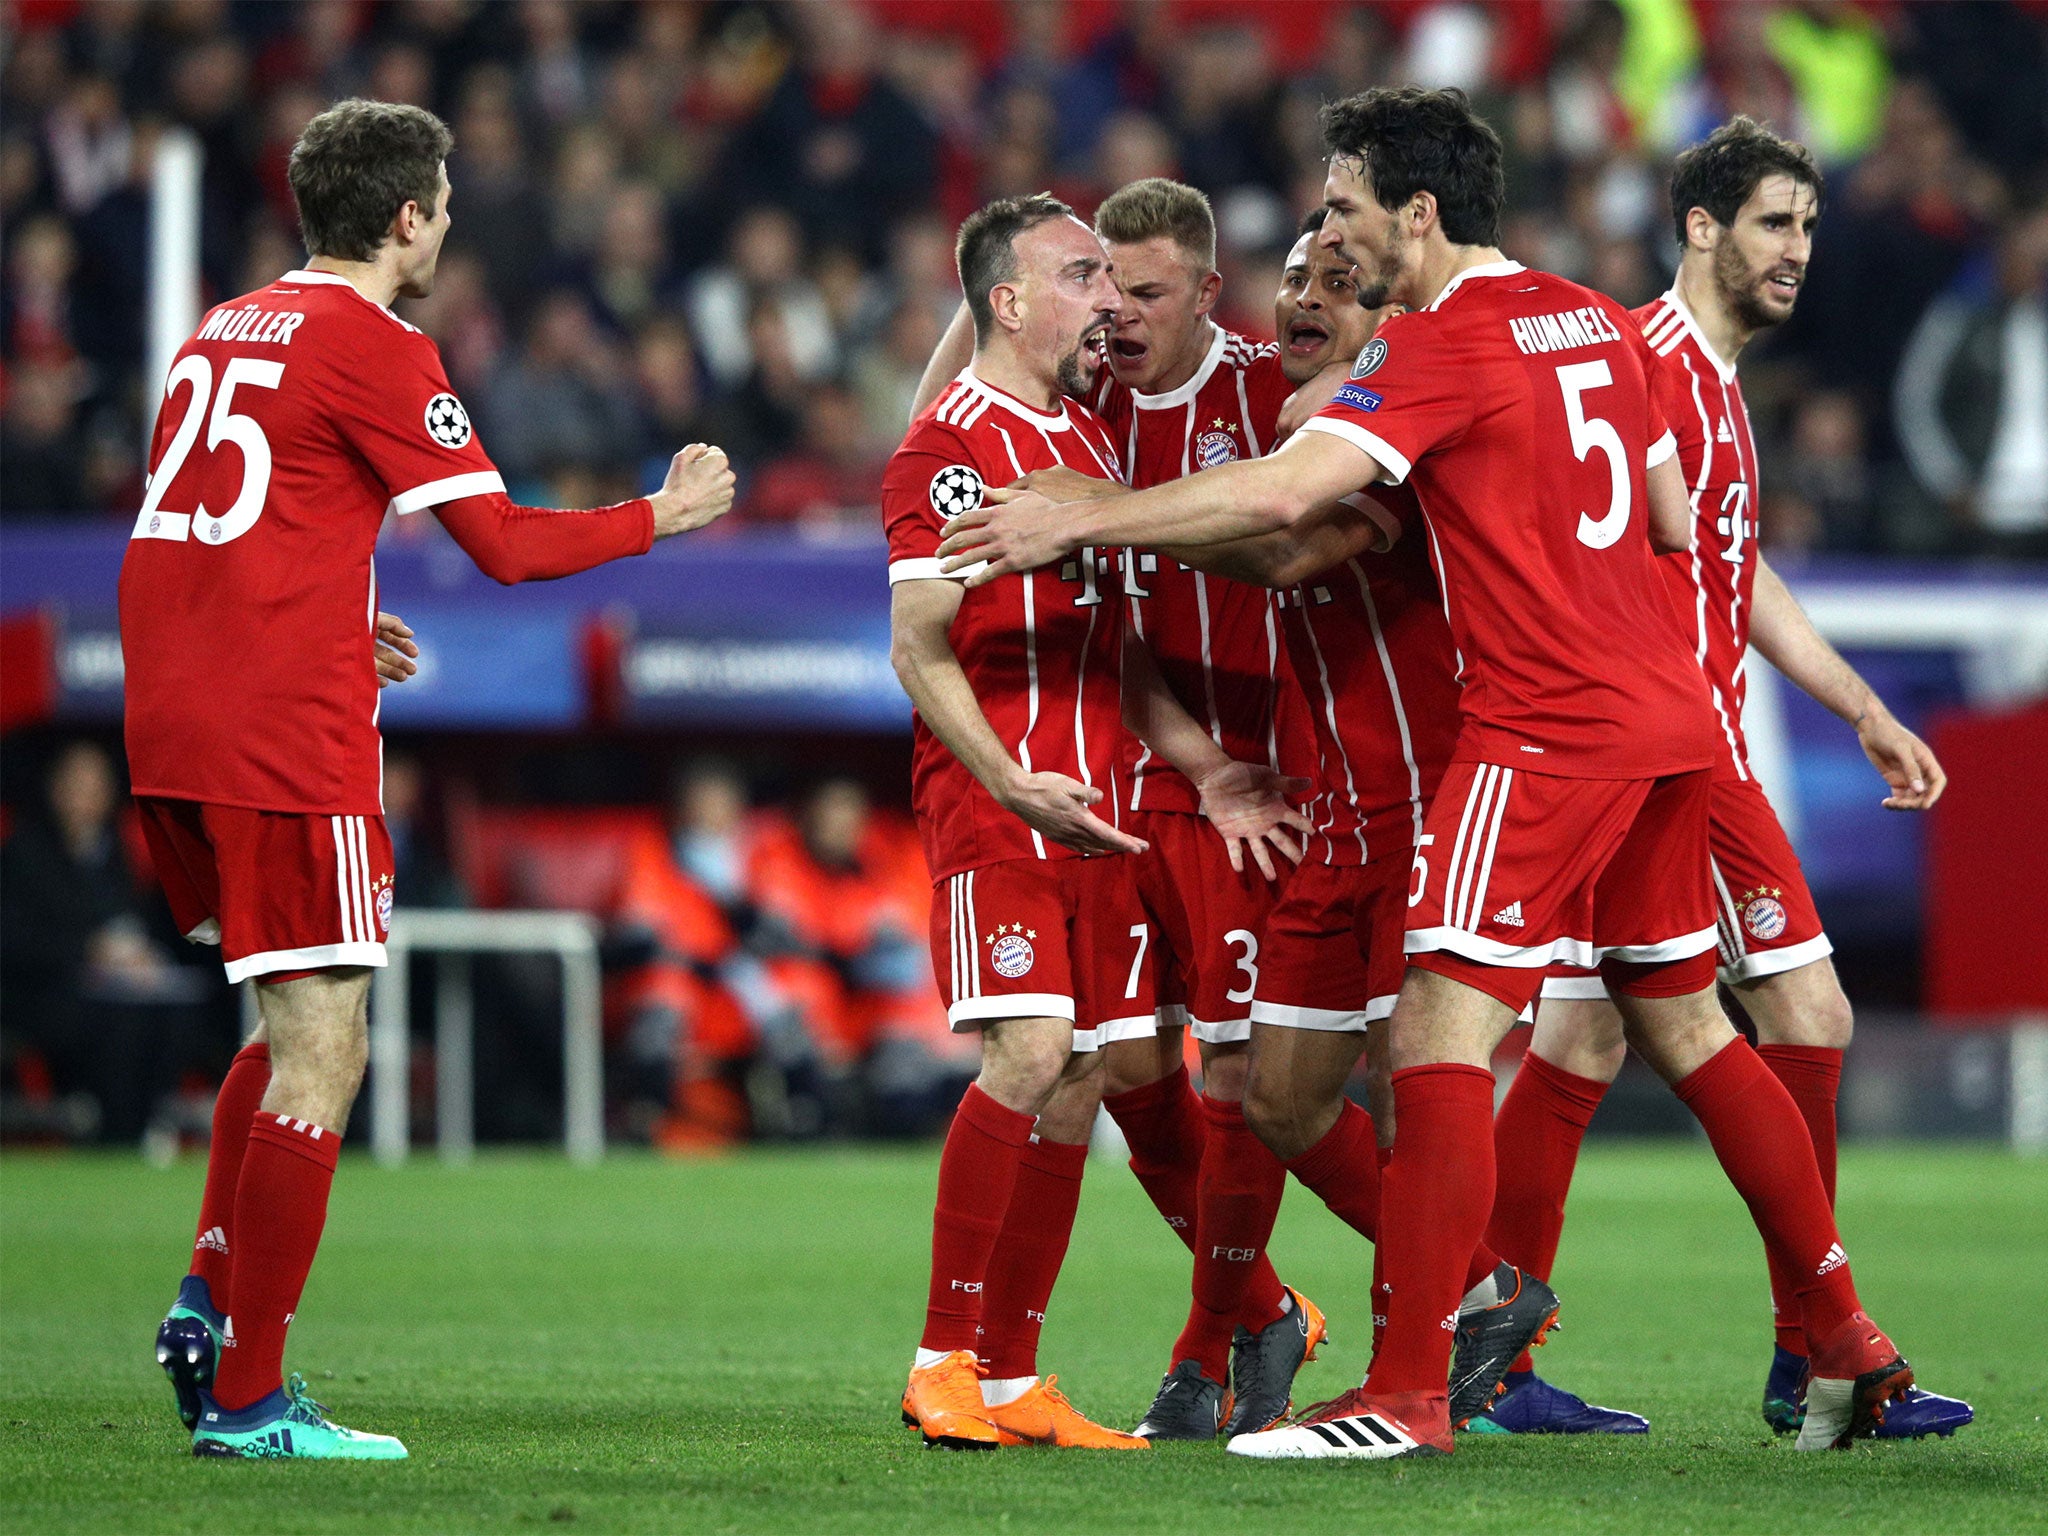 Bayern won in Seville and are big favourites to go through